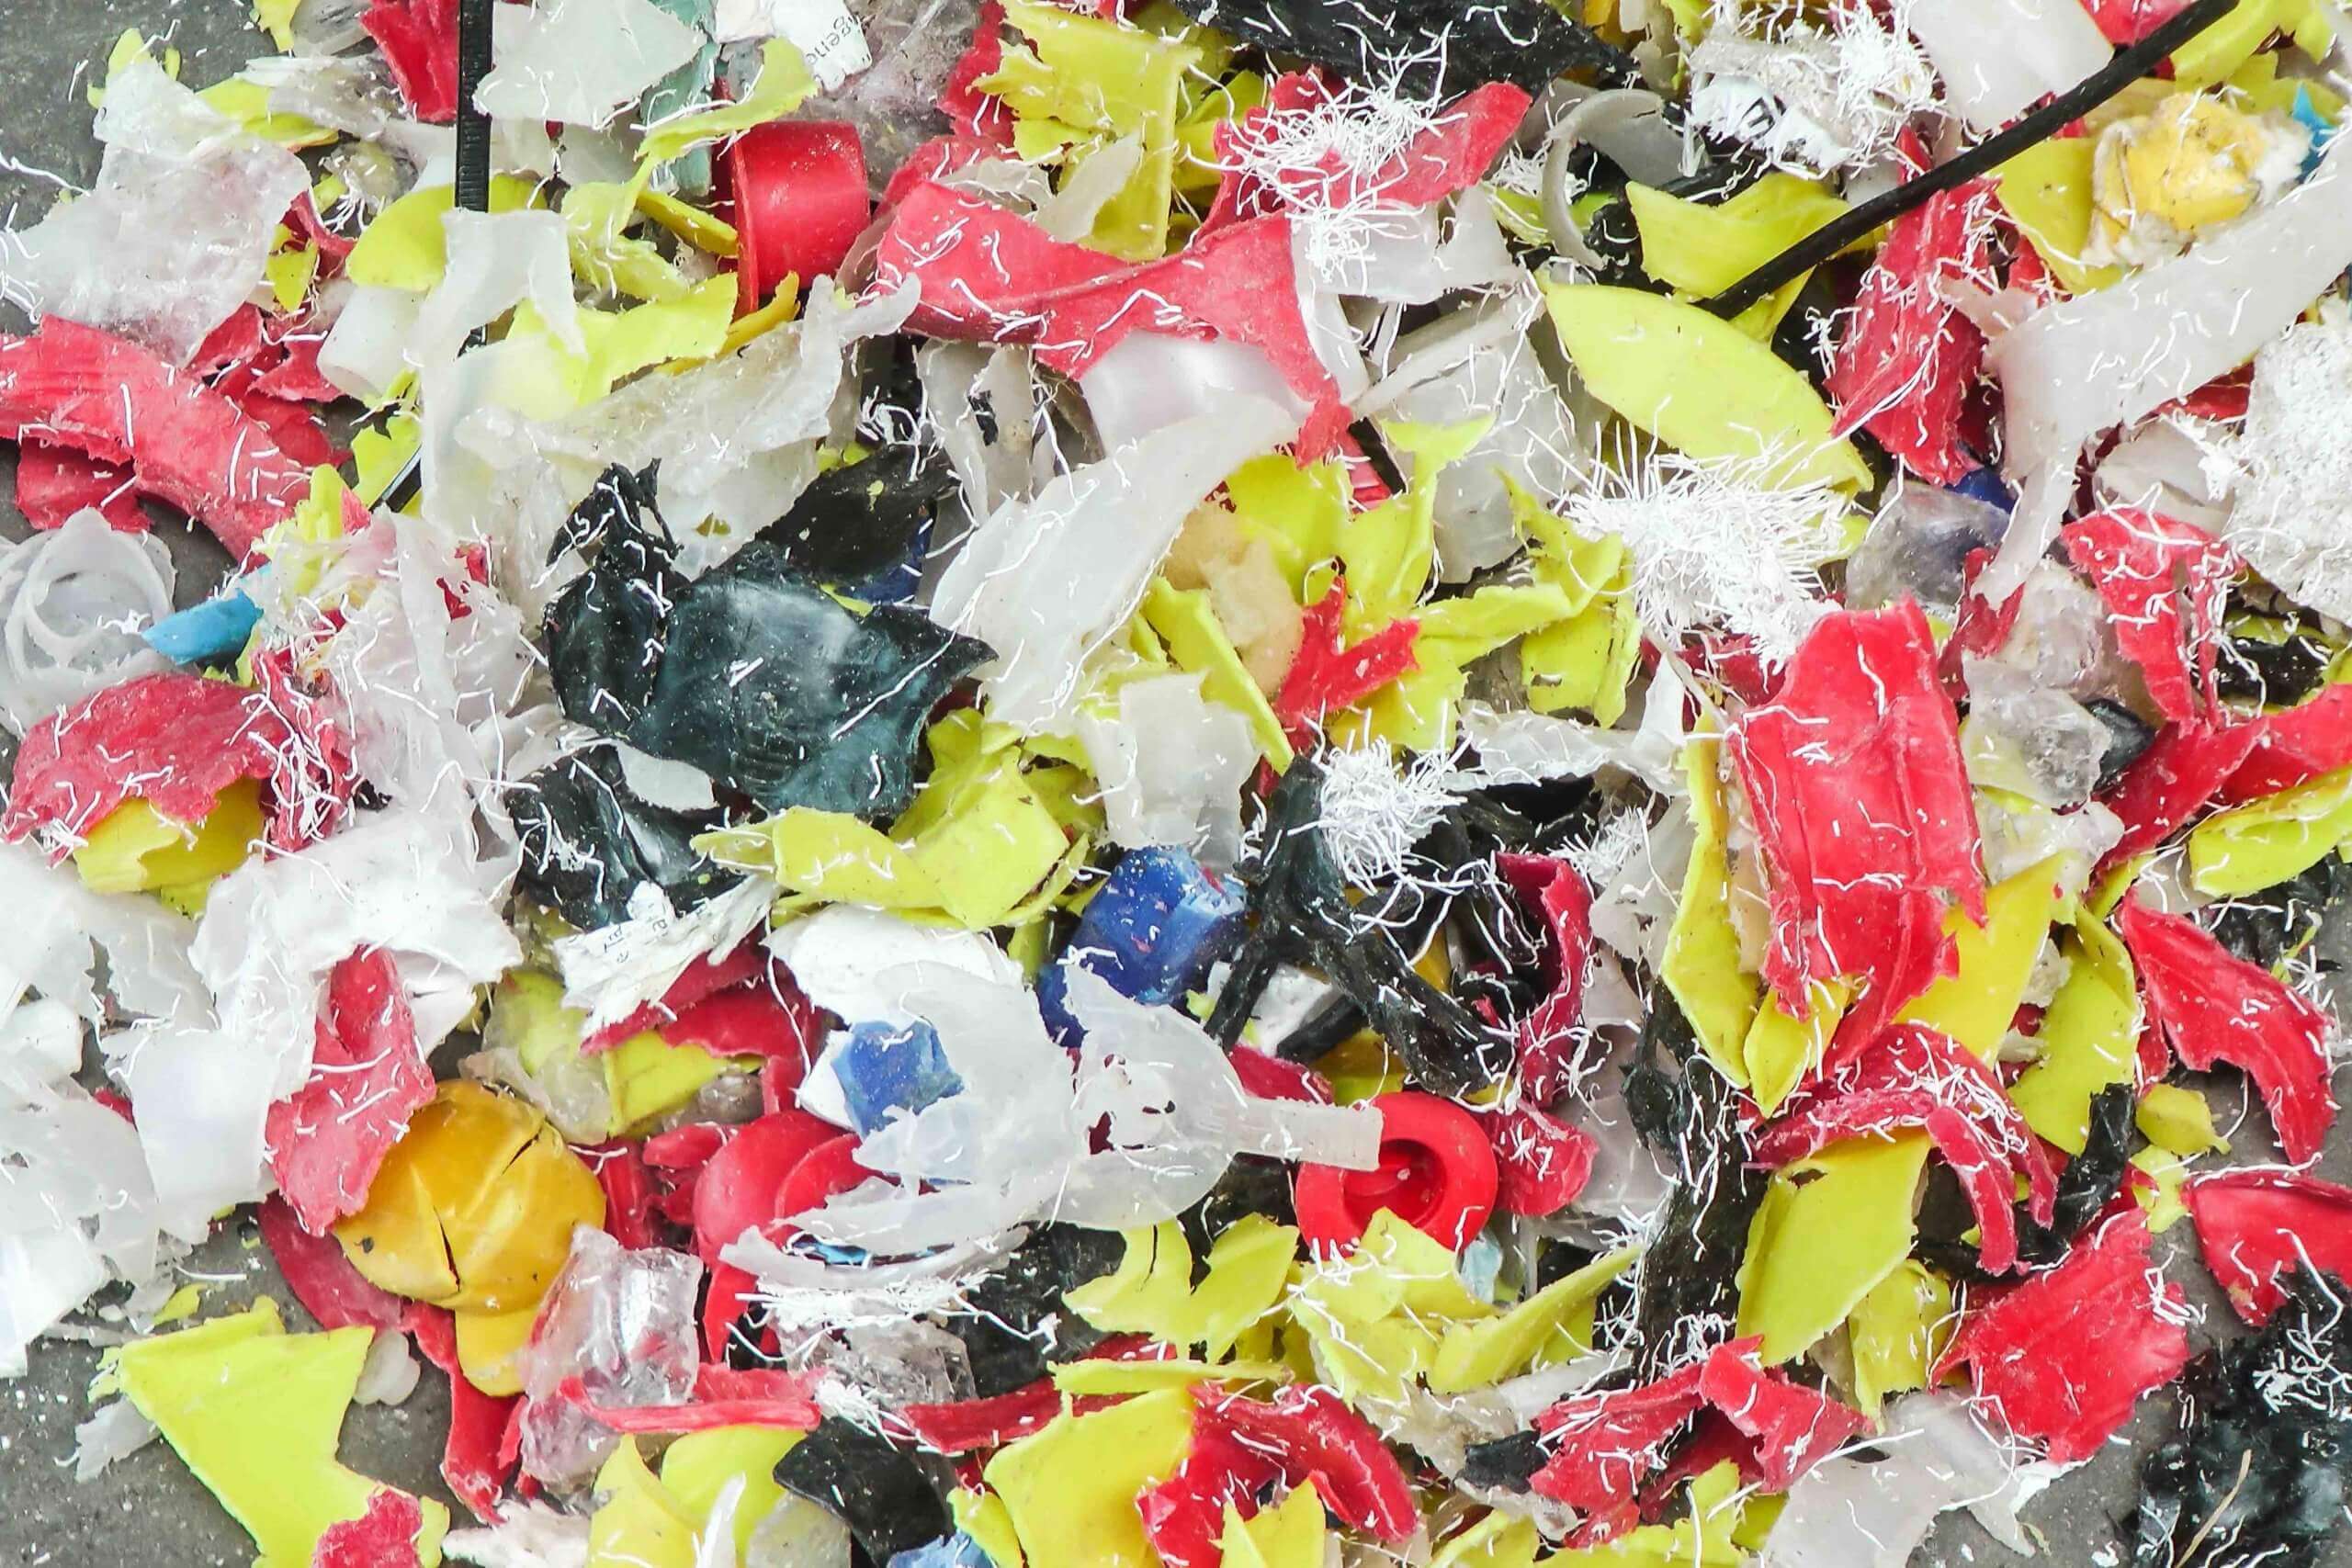 WEIMA Shredding Solutions for Post-Consumer Plastic Recycling at K